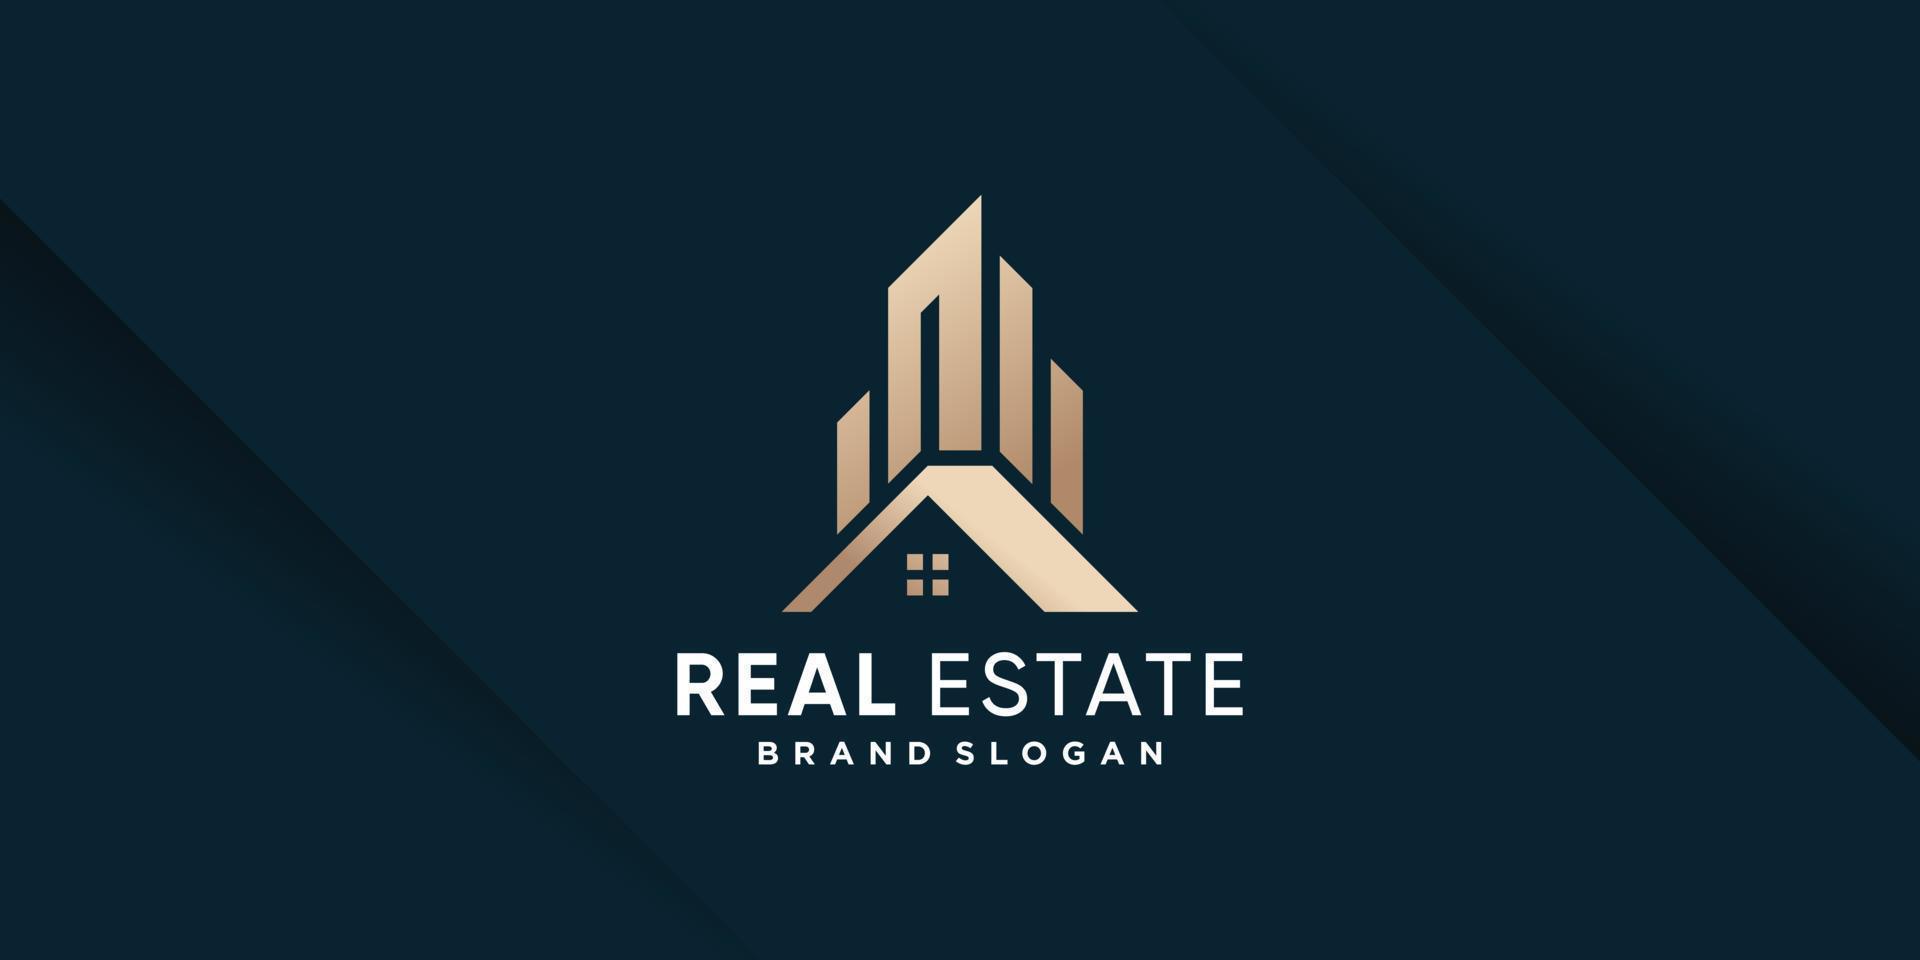 Real estate logo template with golden creative style Premium Vector part 3